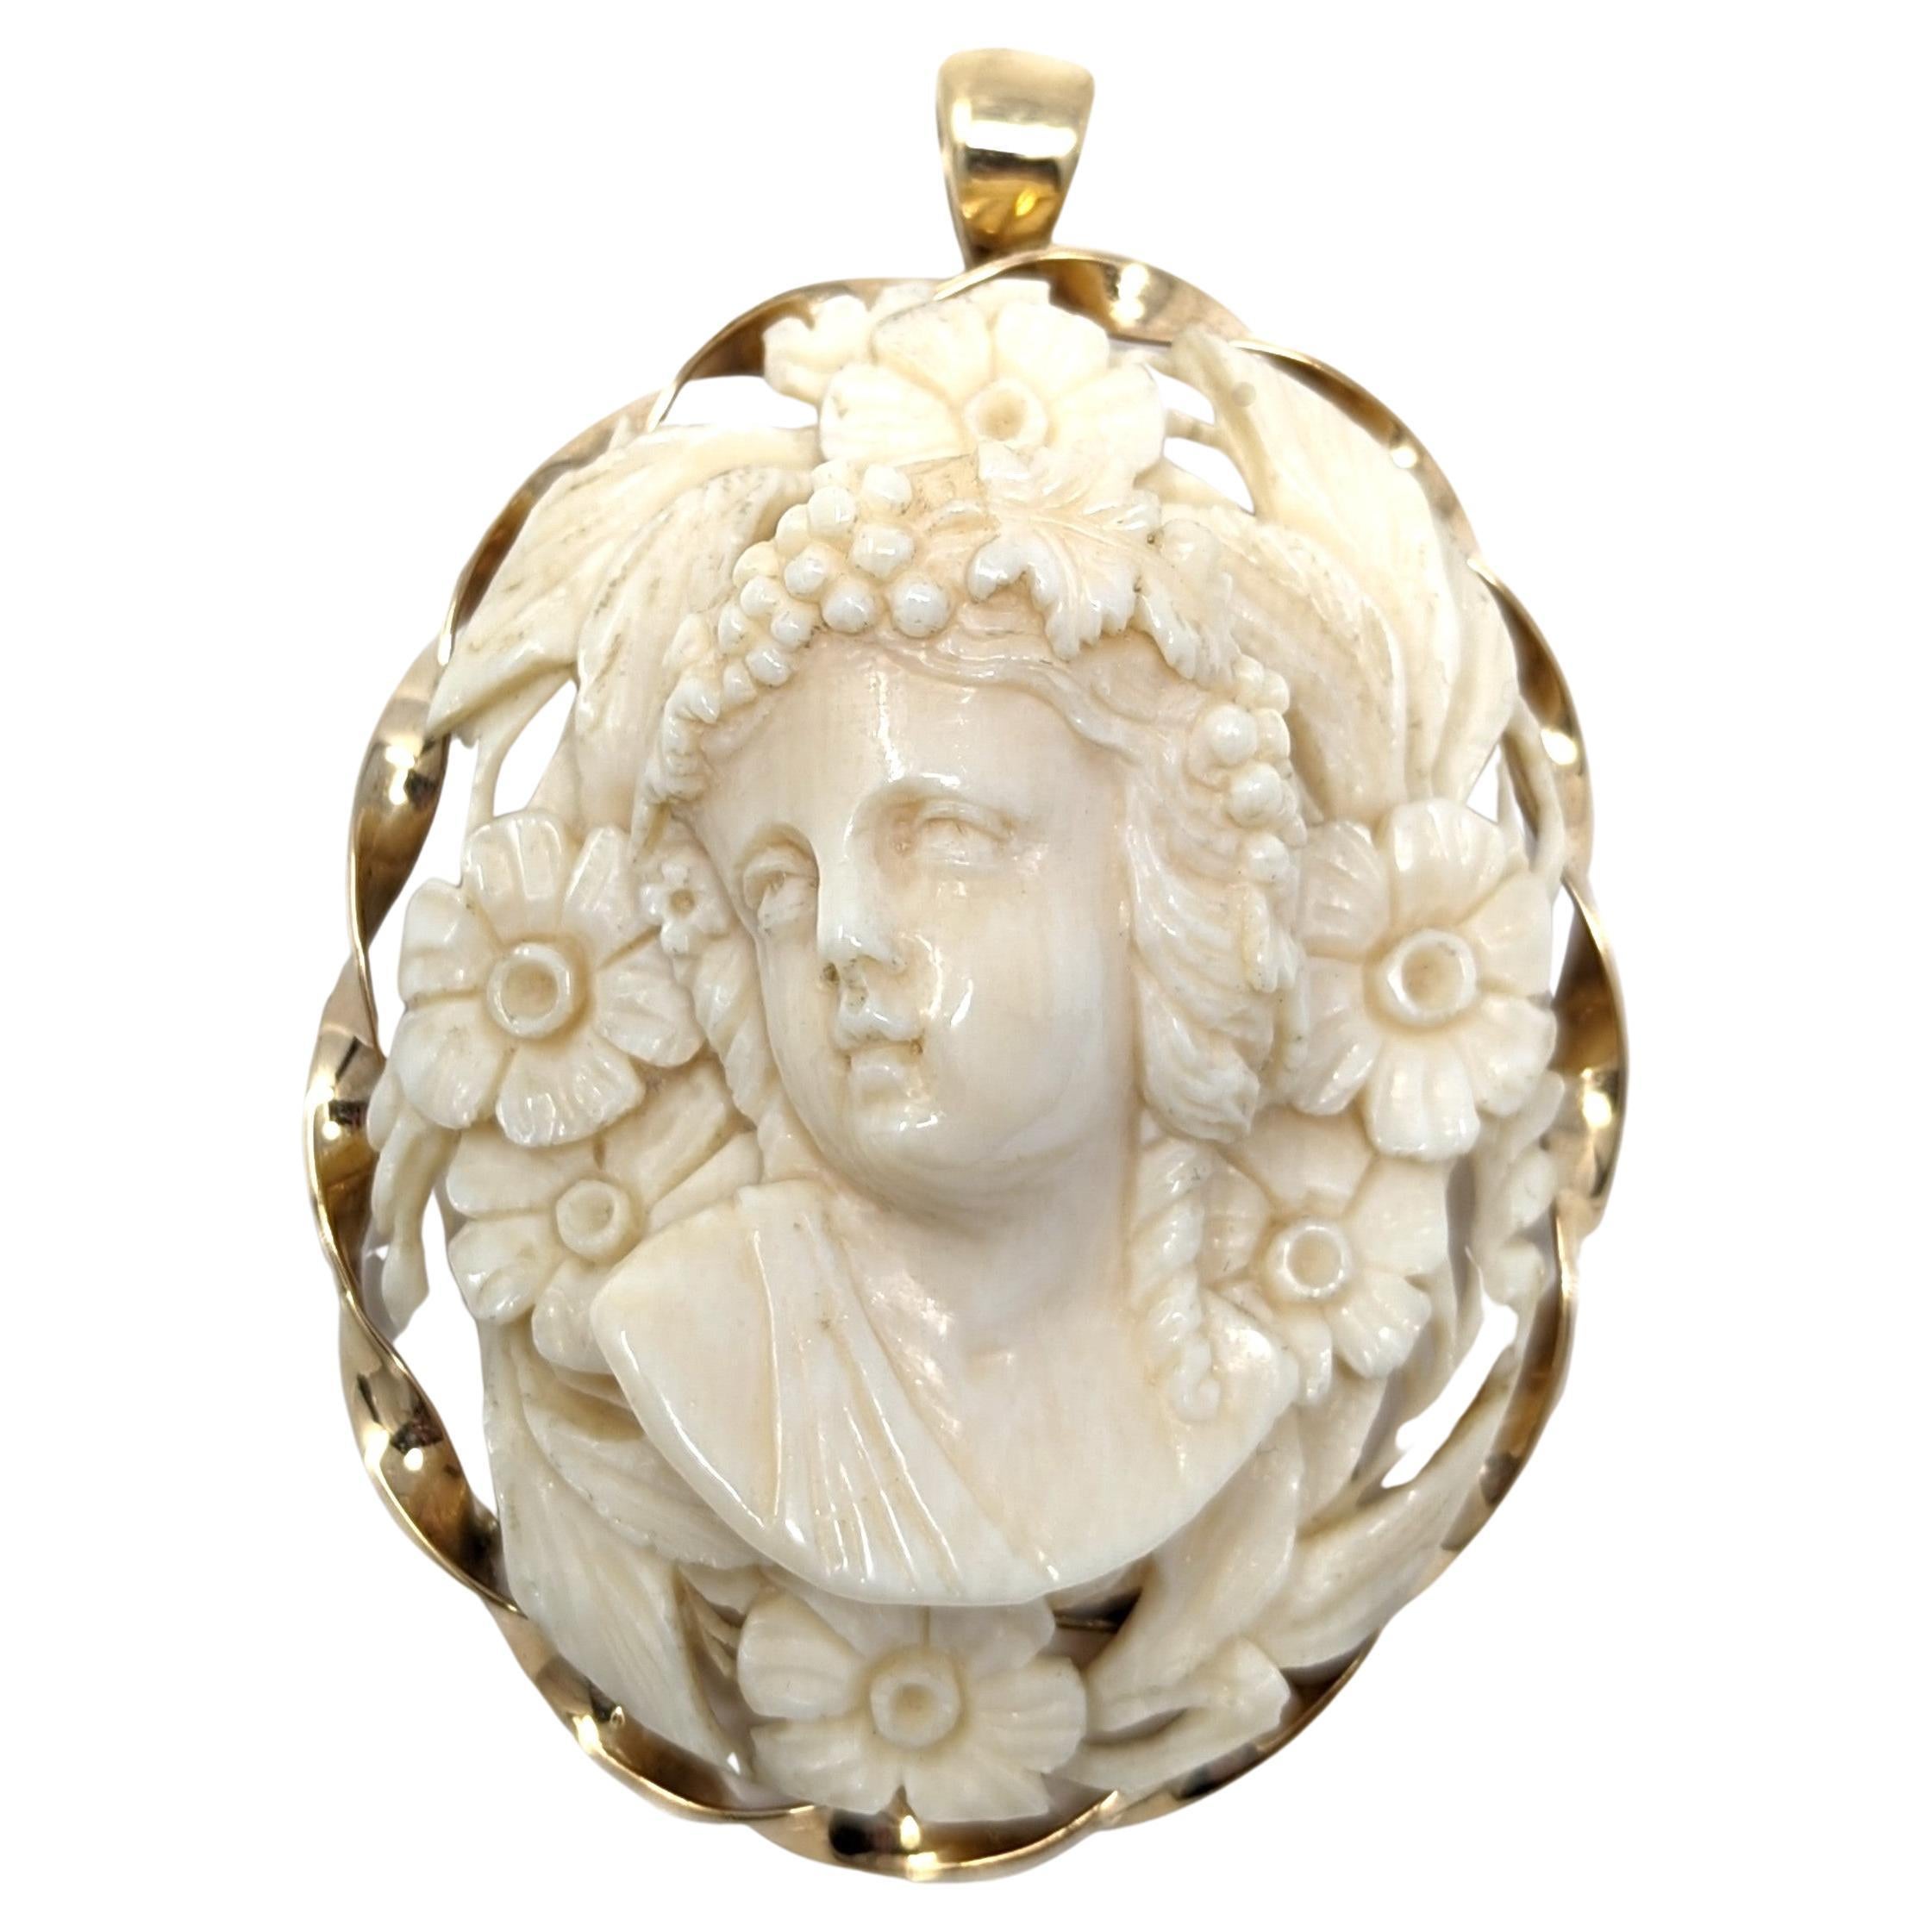 Antique 14k Hand Carved Bone Cameo Pendant Brooch High Relief Solid Yellow Gold